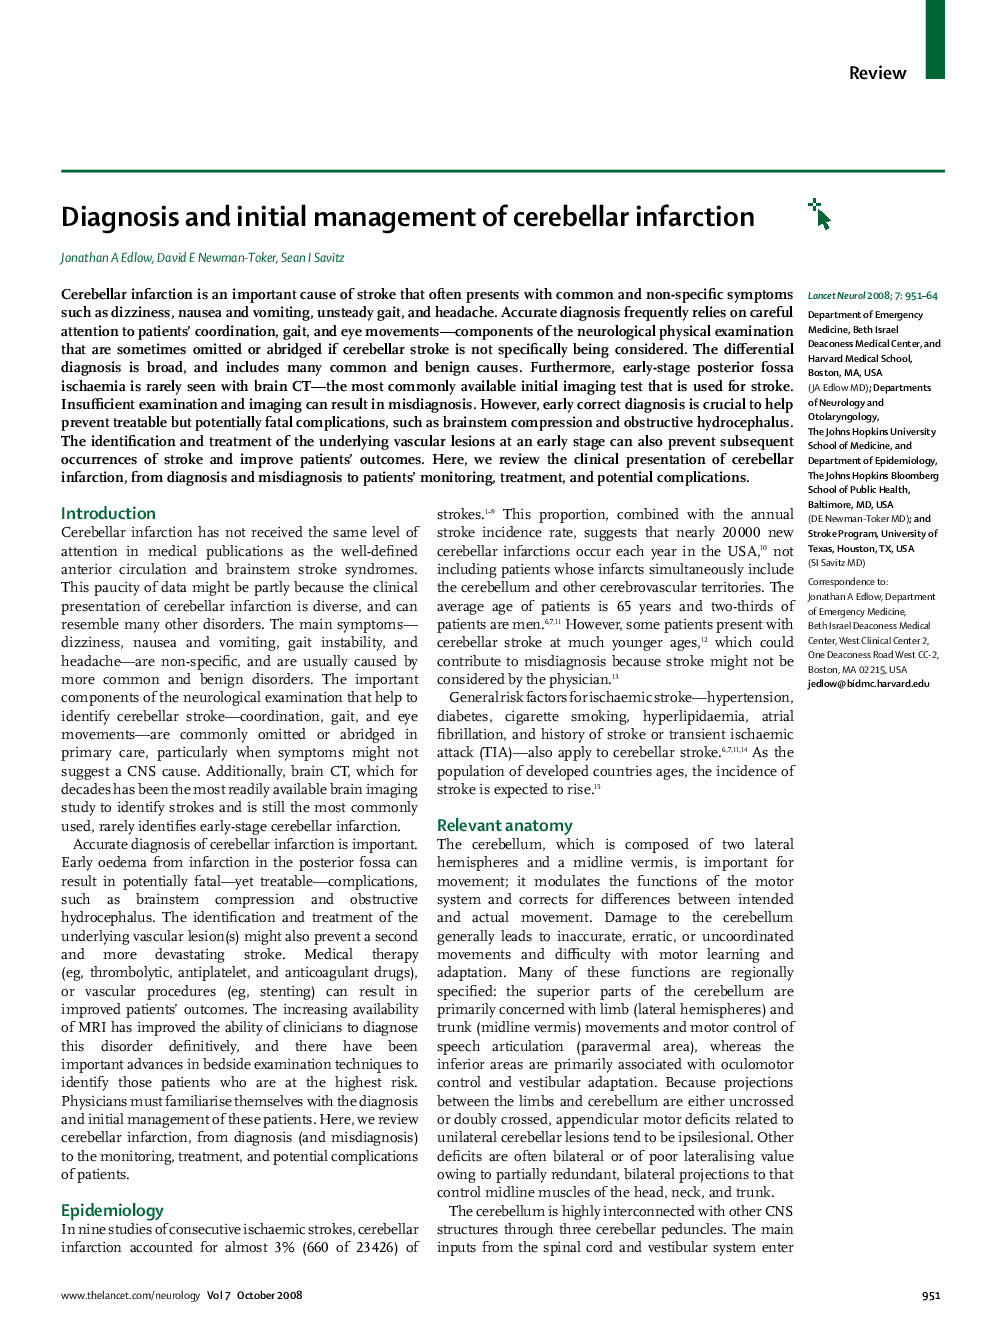 Diagnosis and initial management of cerebellar infarction